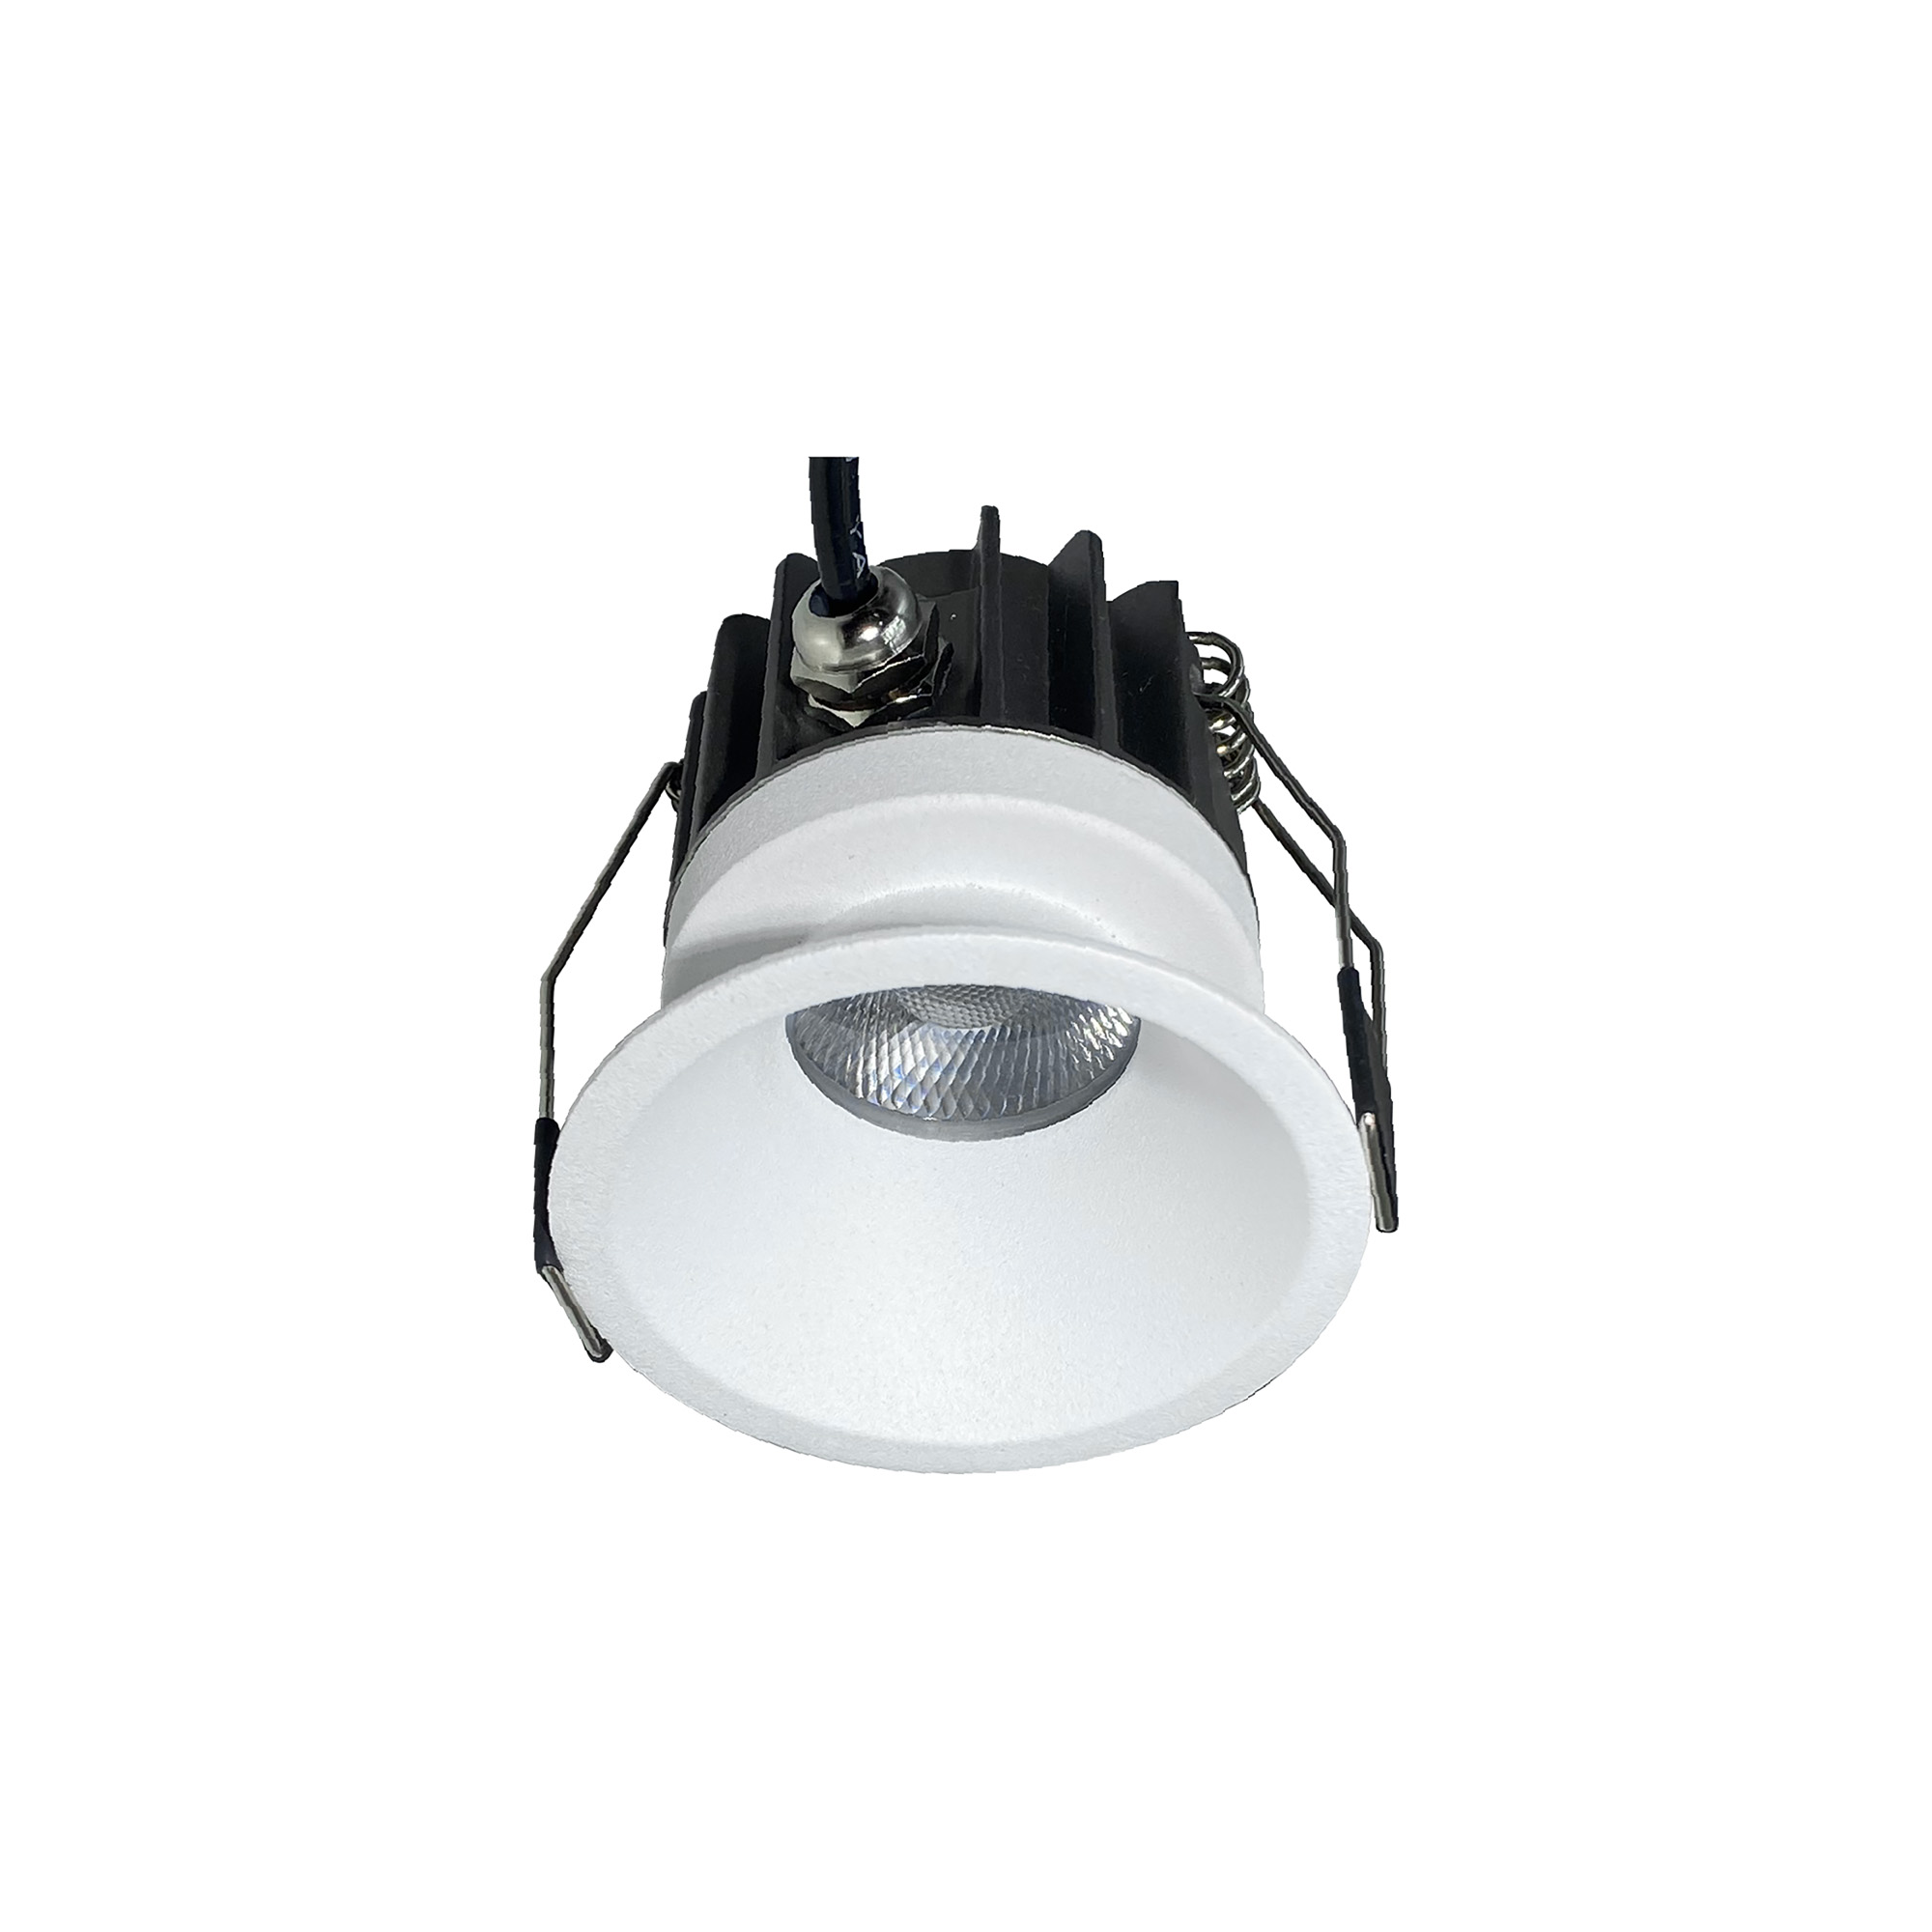 M8764  Rombok Downlight 8W LED, Dimmable CCT LED, Cut Out: 55mm, 720lm, 36° Deg, IP65 DRIVER INC., White